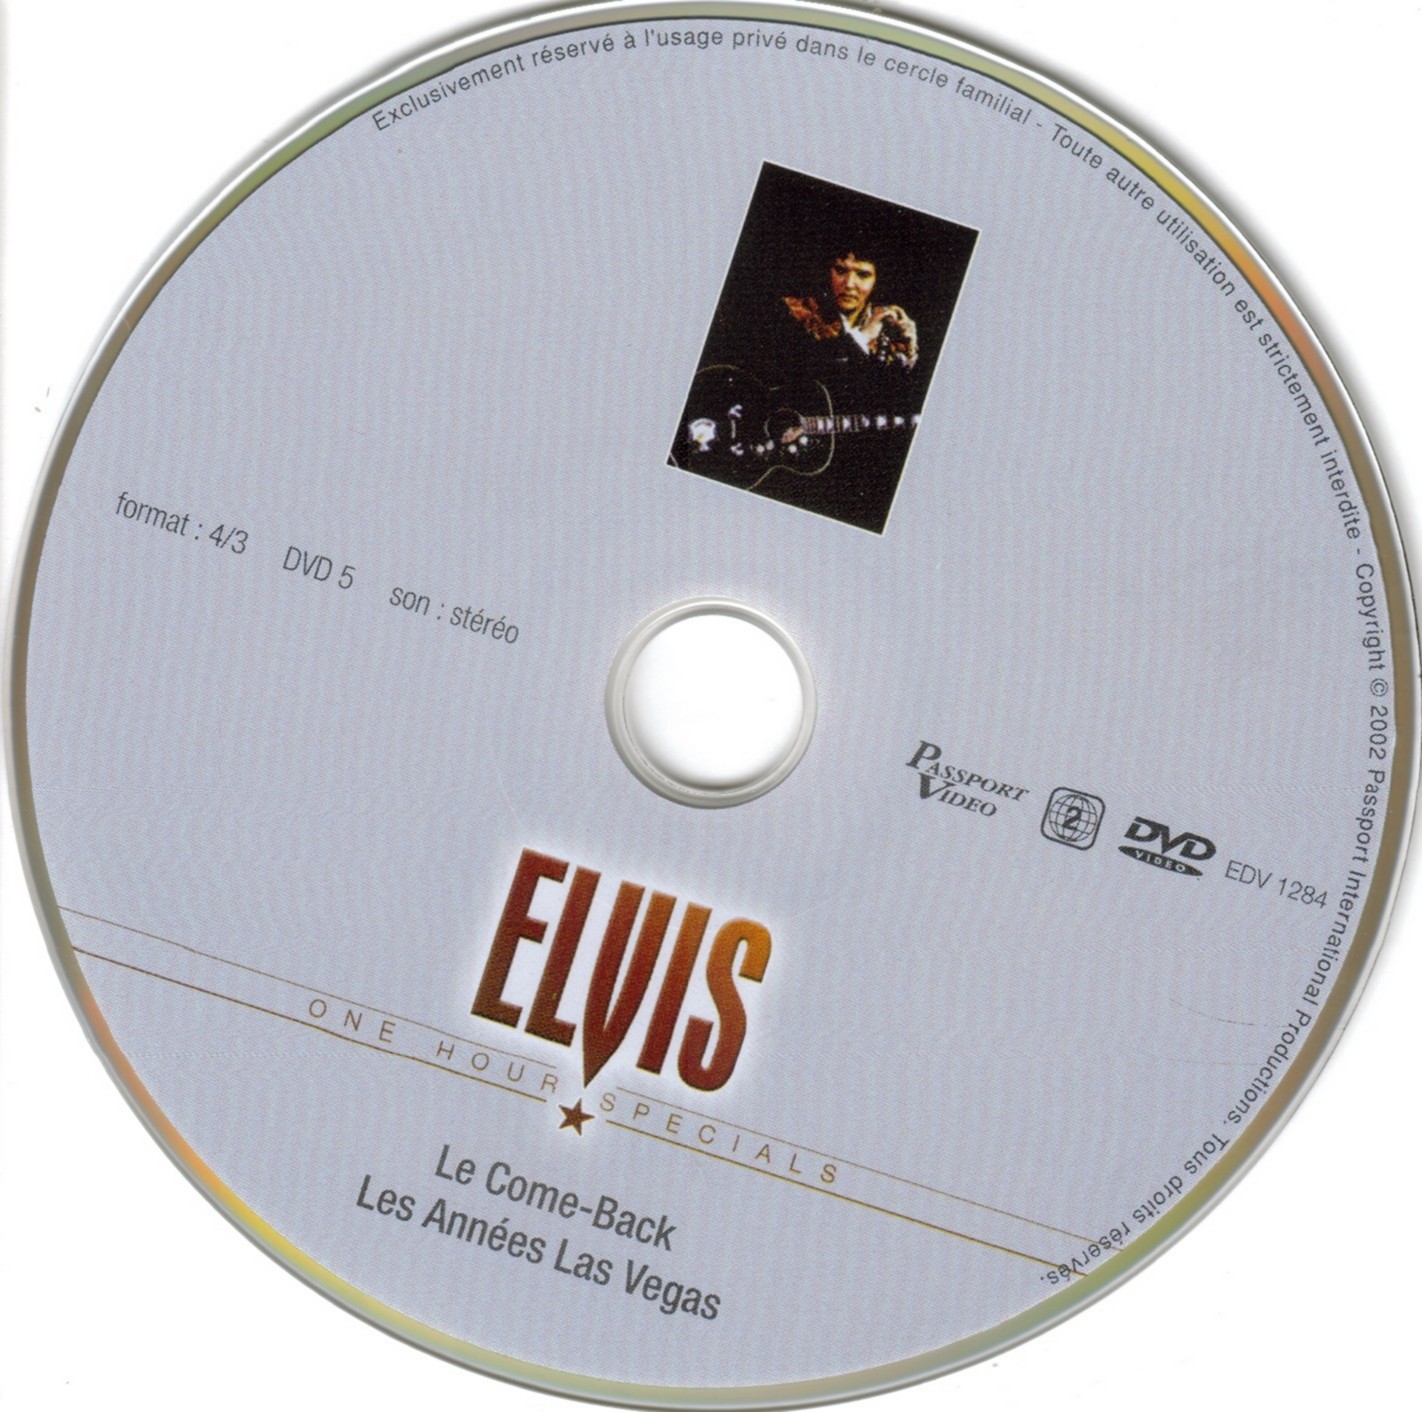 Elvis One hour Specials Le come-back